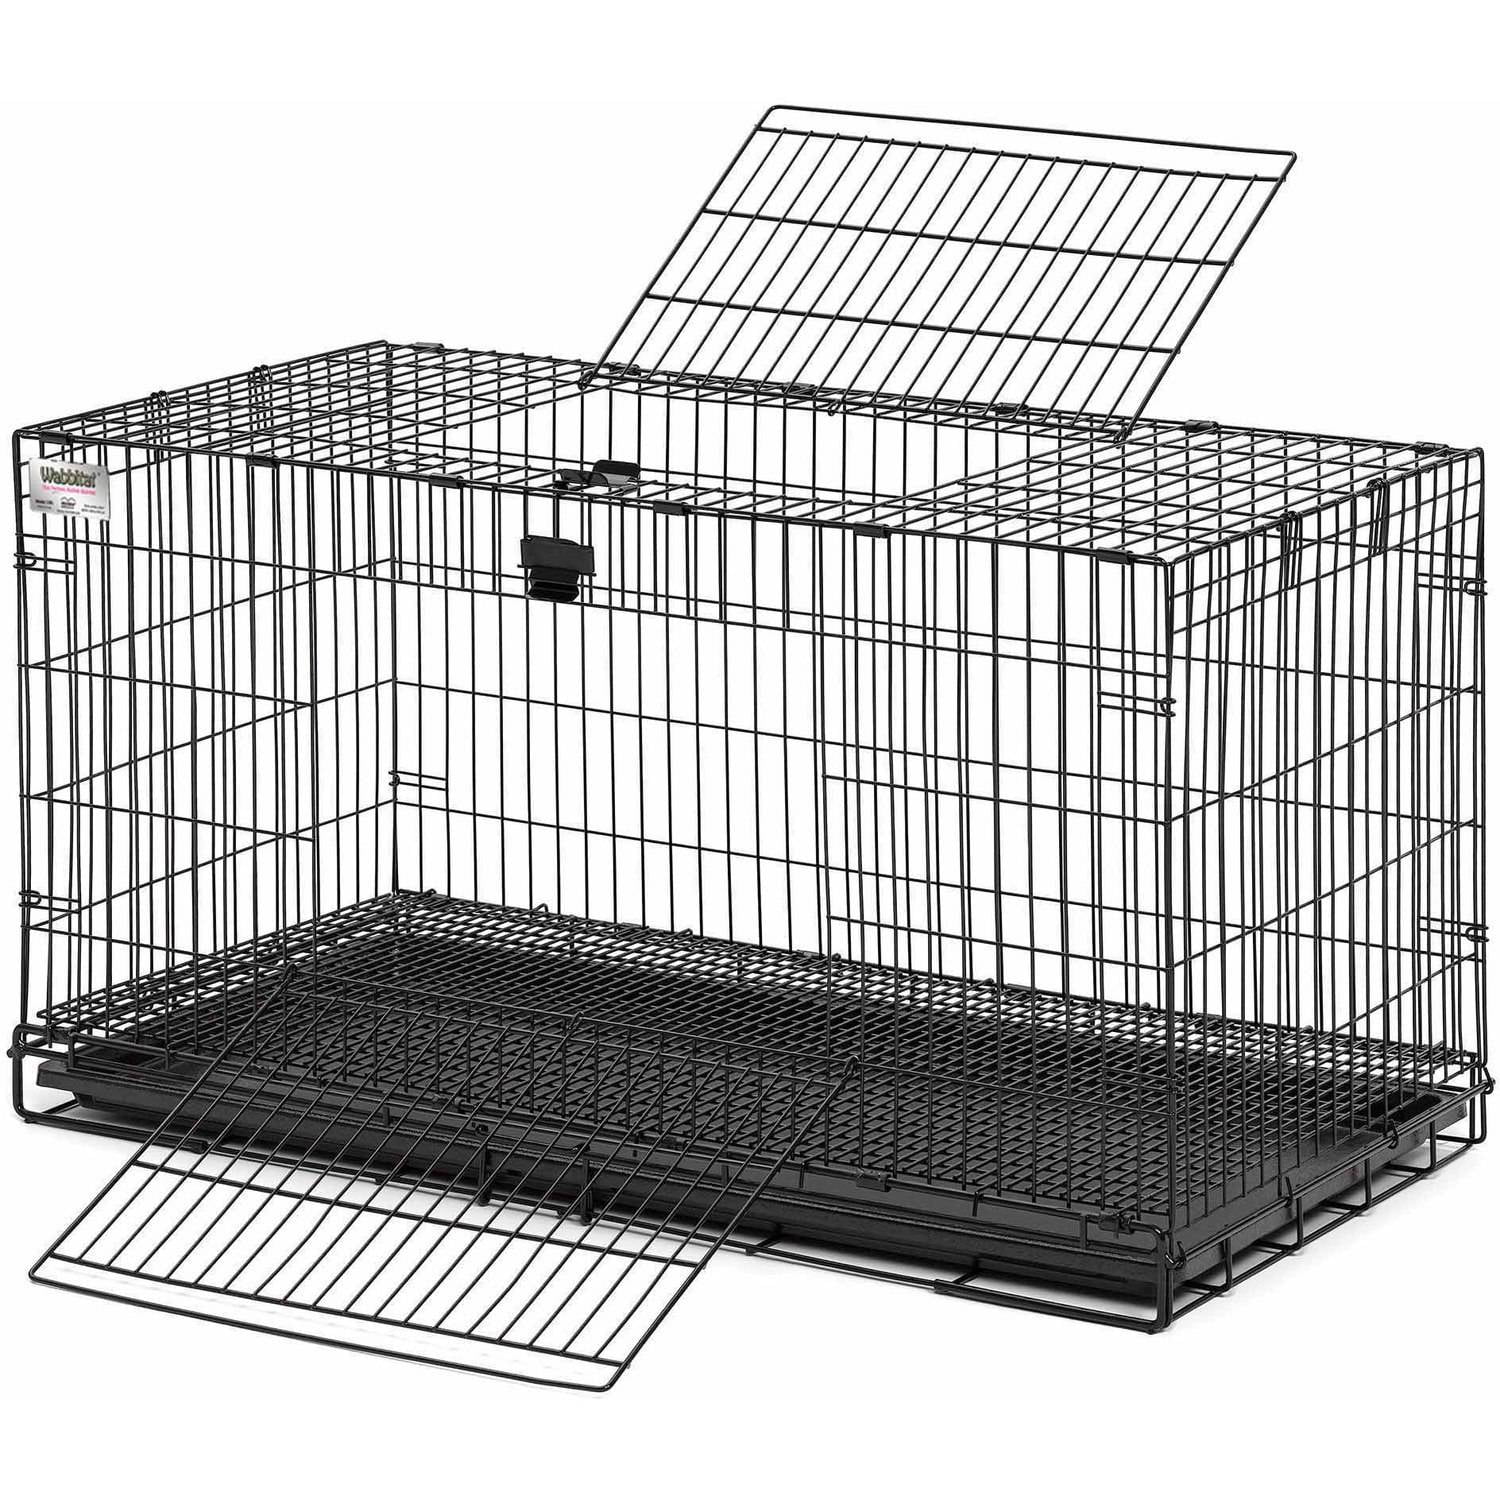 Includes 1//2 inch hygienic floor grid /& Top Front Door Access MidWest Folding Metal Rabbit Cage